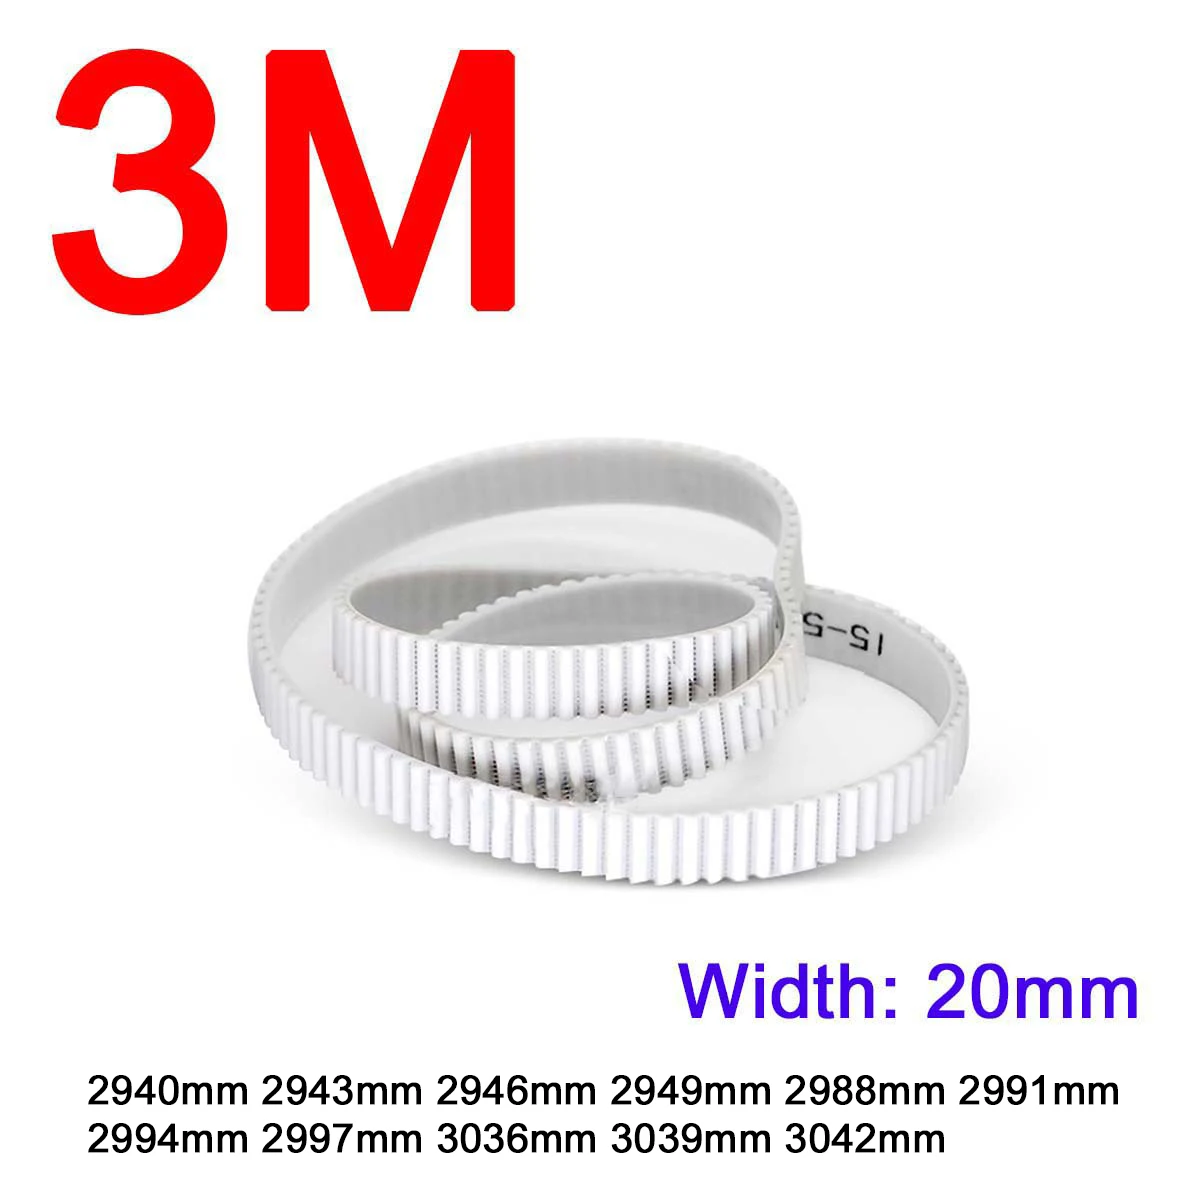 

1Pc Width 20mm 3M White Polyurethane PU Tooth Timing Belt Pitch Length 2940 2943 2946 2949 2988 2991 2994 2997 3036 3039 3042mm